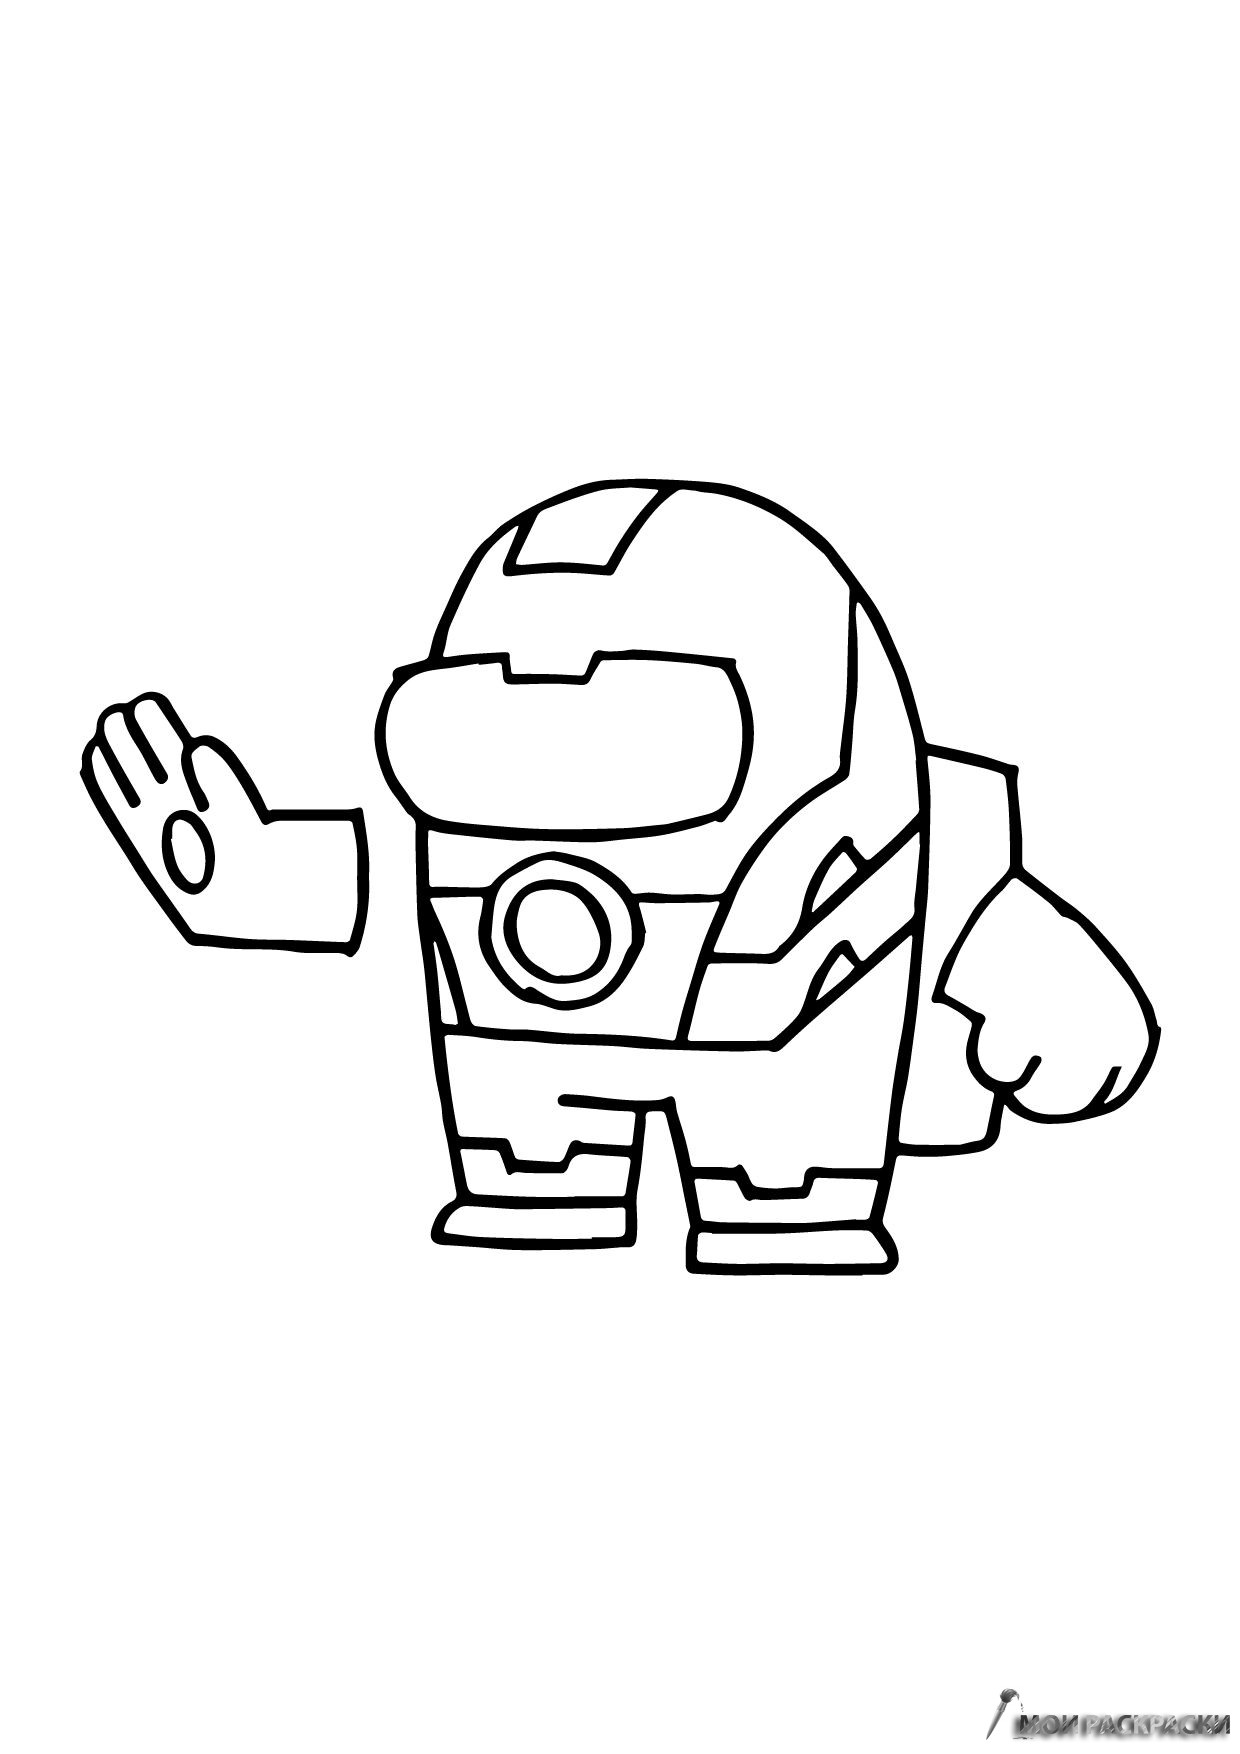 Bold ace superhero coloring page